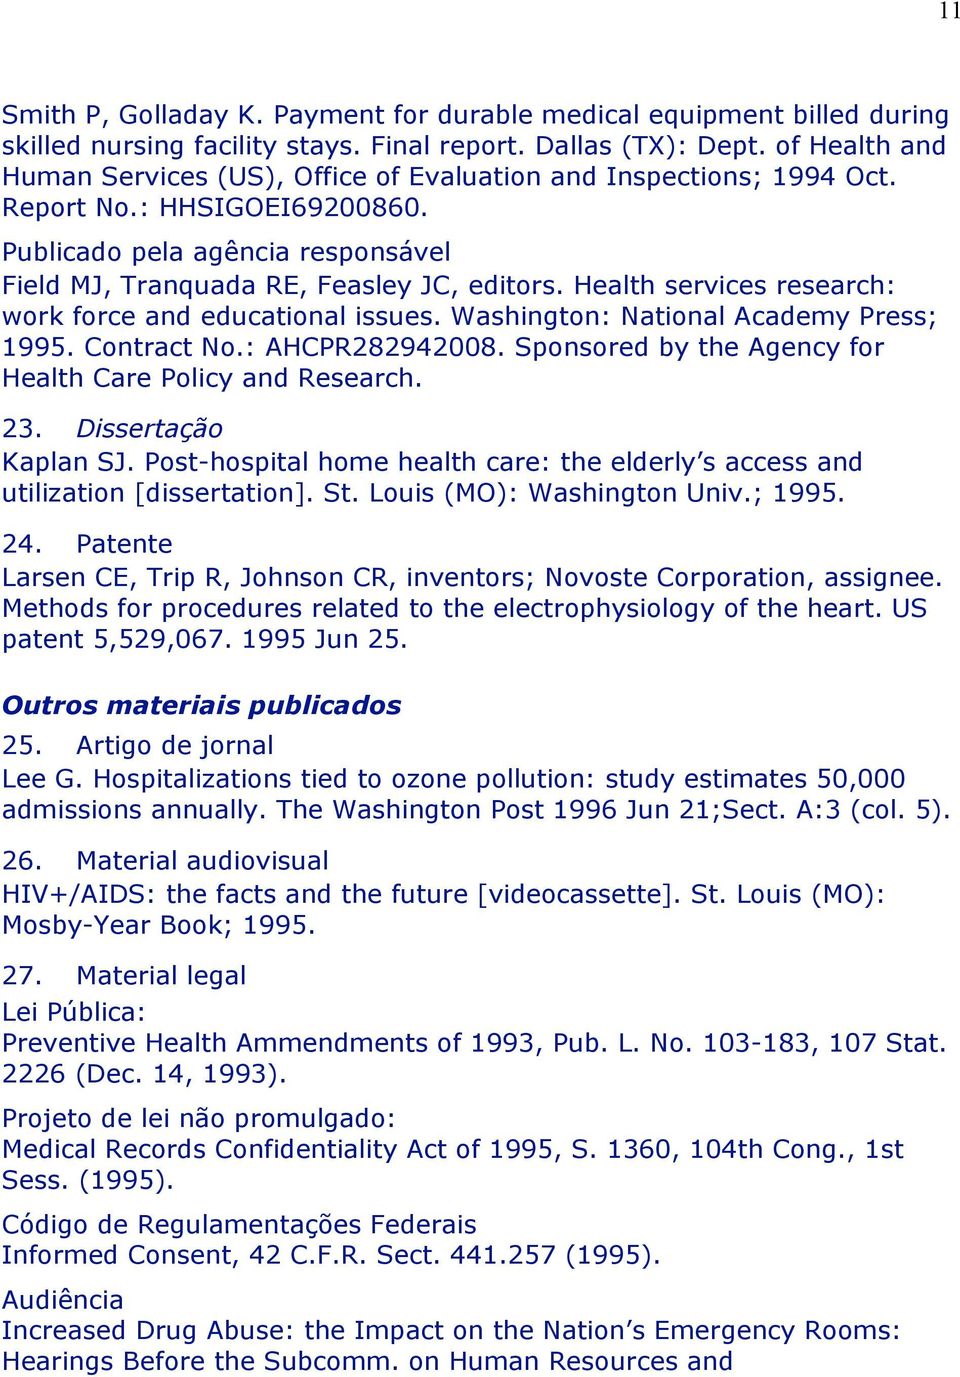 Health services research: work force and educational issues. Washington: National Academy Press; 1995. Contract No.: AHCPR282942008. Sponsored by the Agency for Health Care Policy and Research. 23.